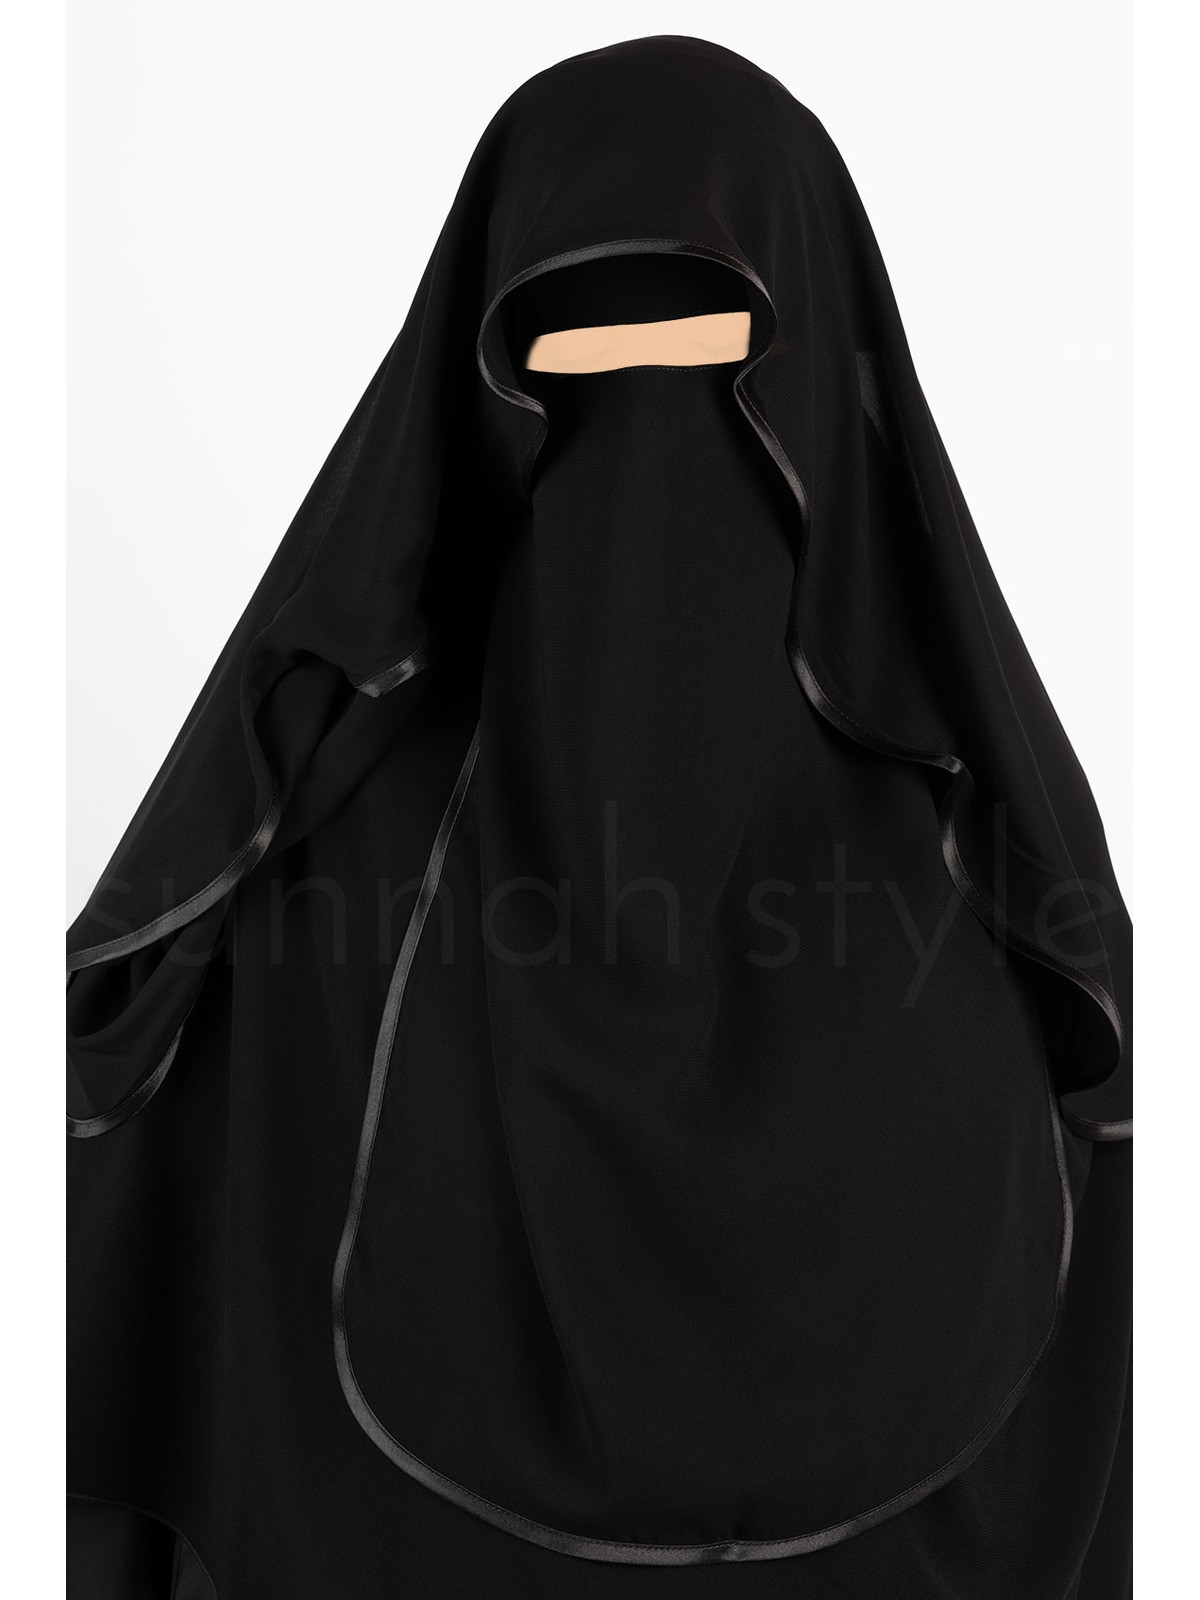 Sunnah Style - Satin Trimmed Butterfly Niqab (Black)